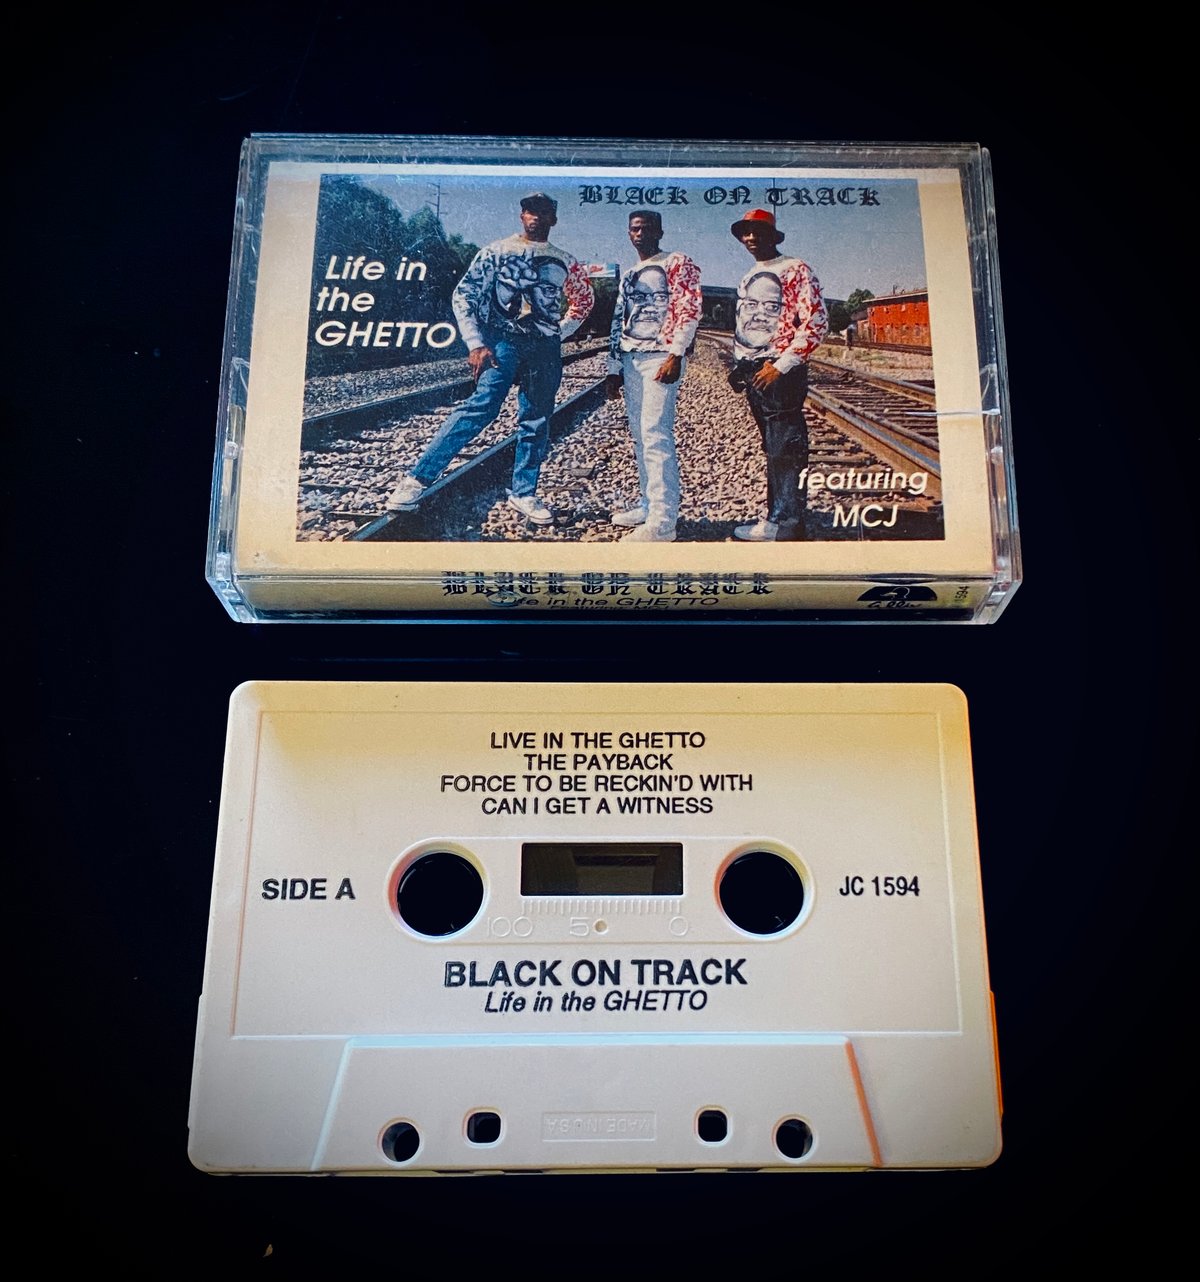 Image of Black On Track “Life In The Ghetto” ft. MCJ